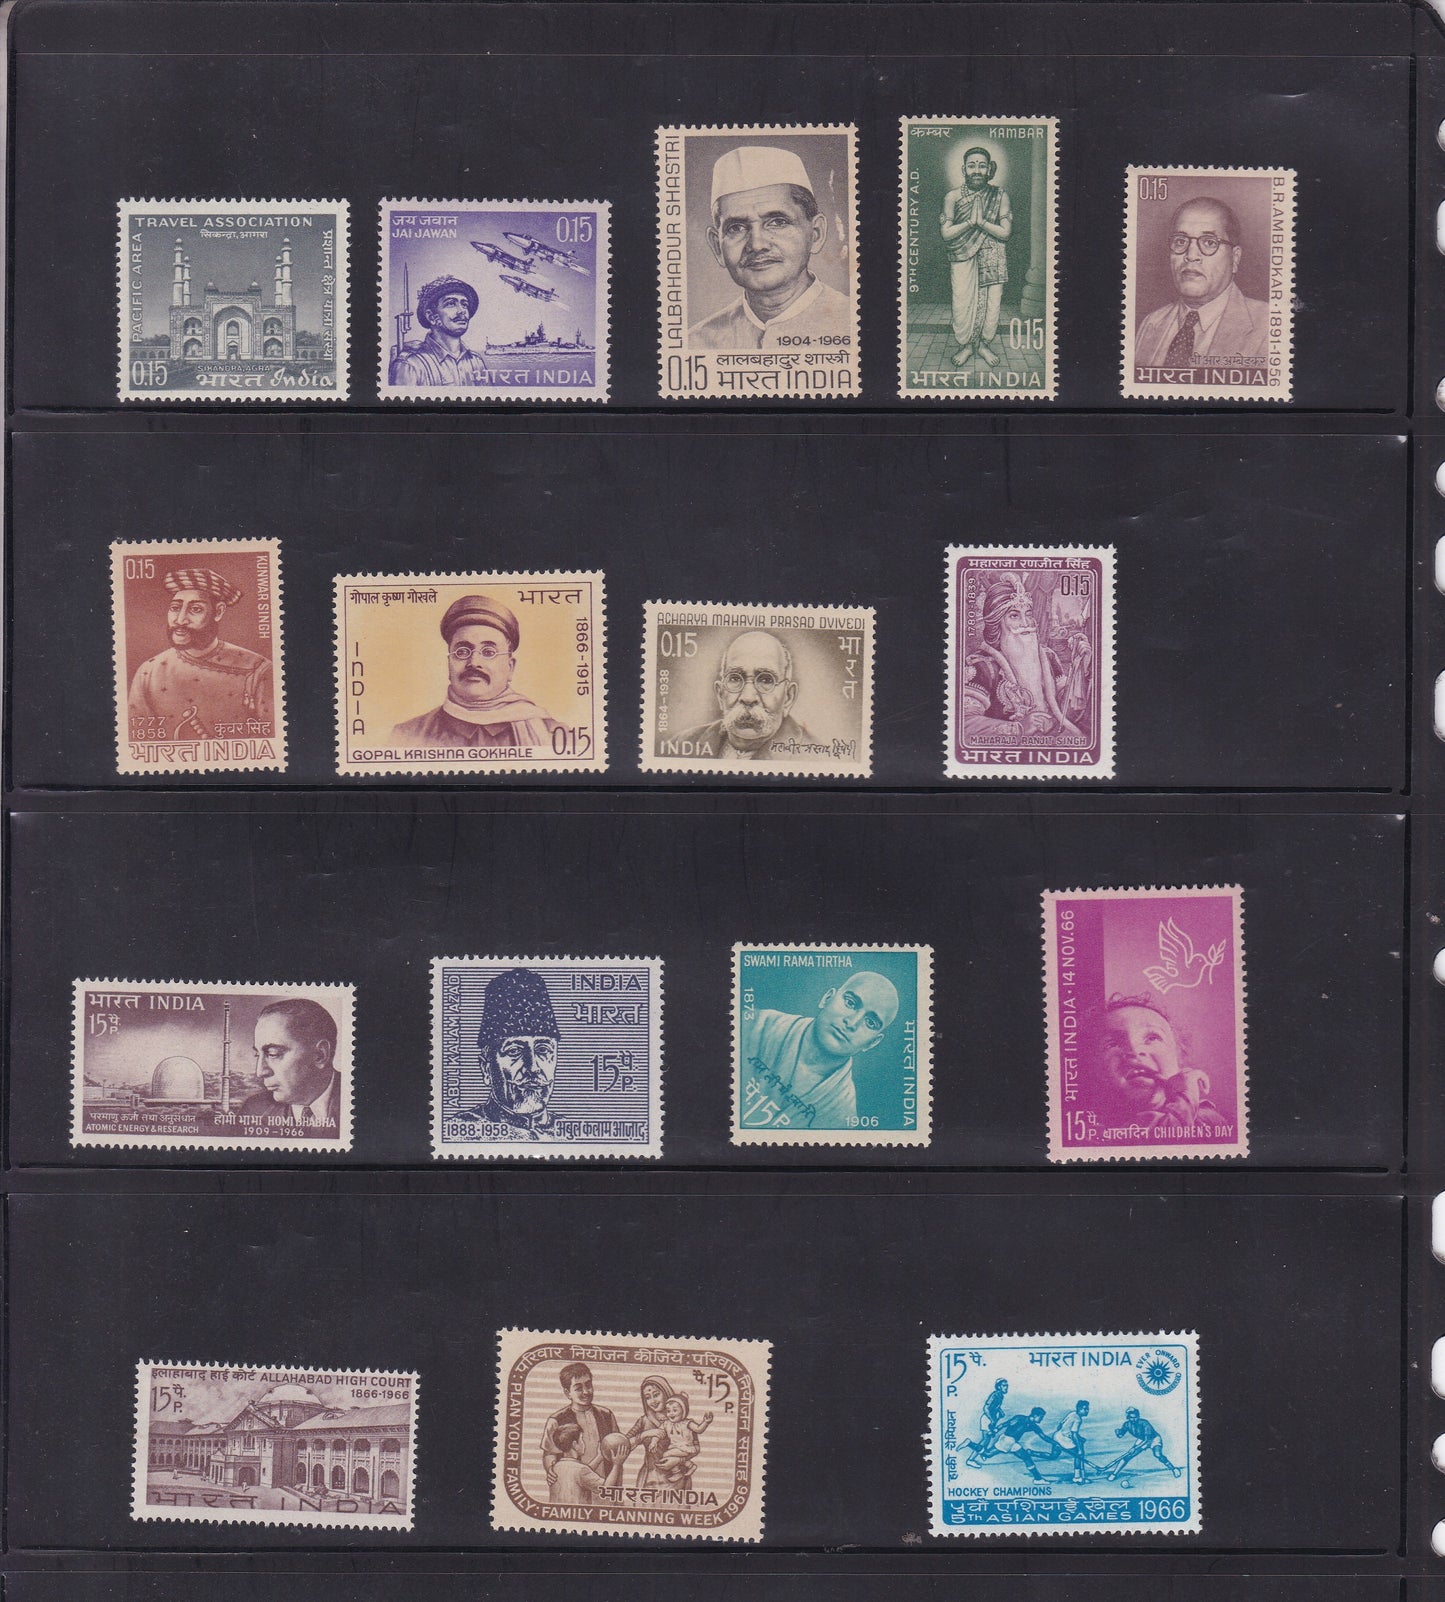 India-1966 Full Year pack MNH Stamps.